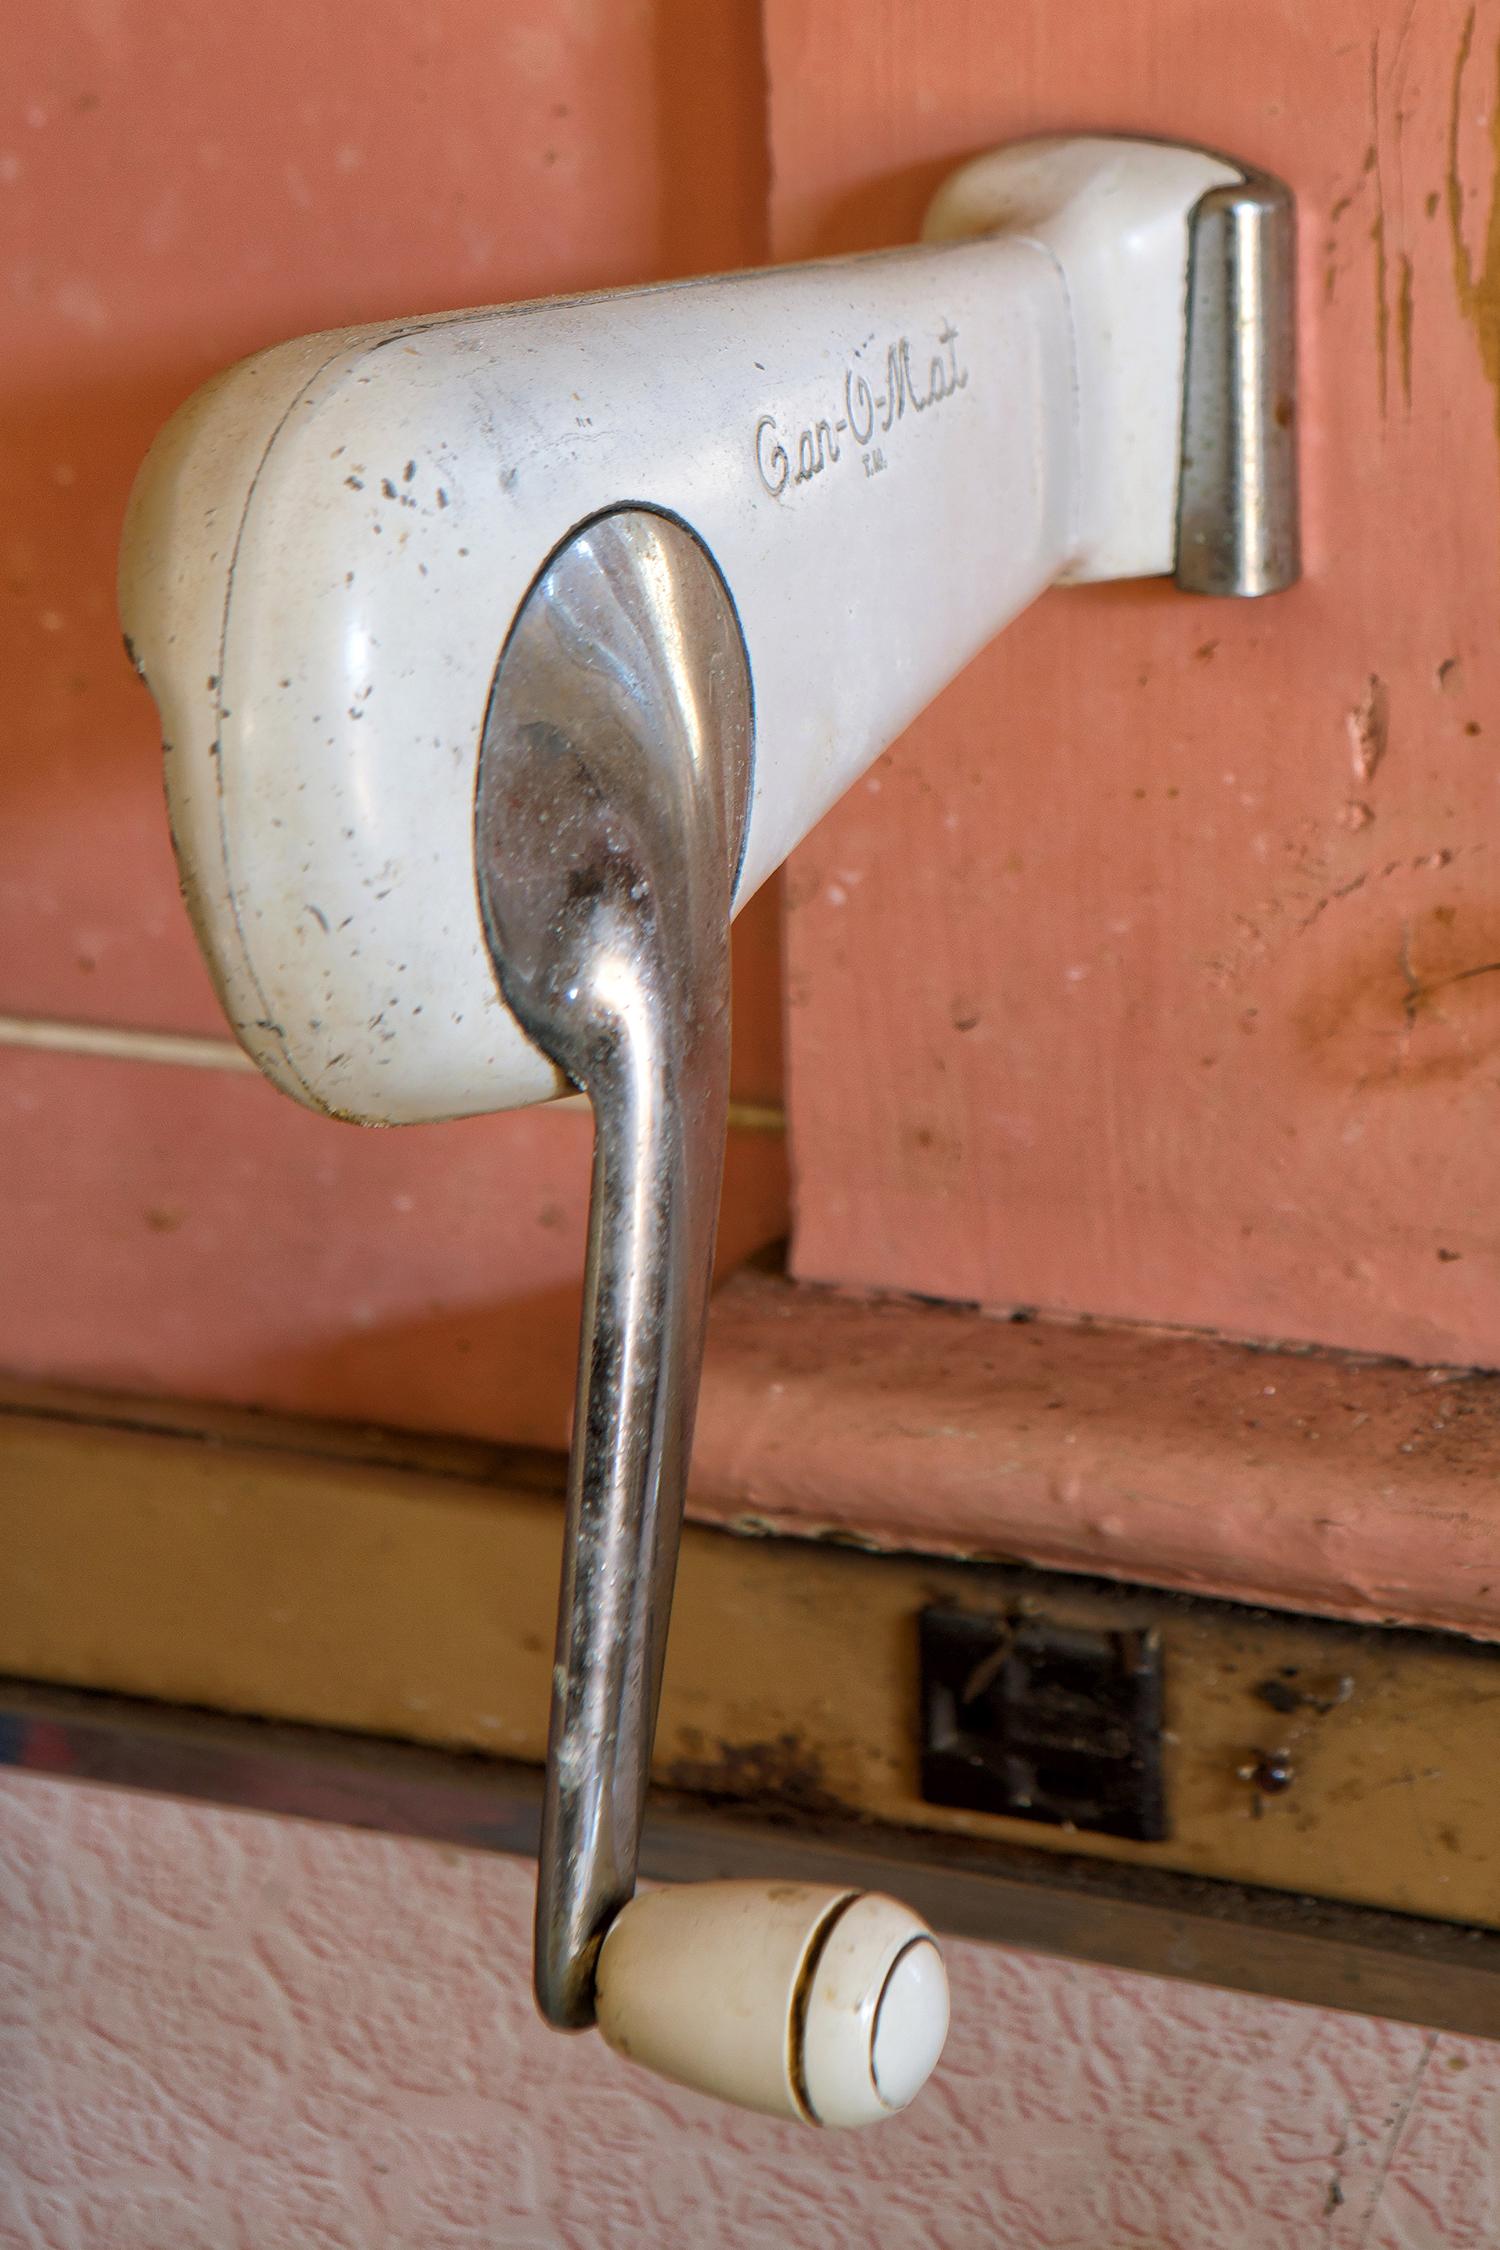 Rebecca Skinner’s “Past” is a 18 x 12 inch metal print and is part of her “Transient” series. The color photograph is of a vintage can opener at an abandoned home. With satin finish, the image is infused directly into metal making it waterproof and